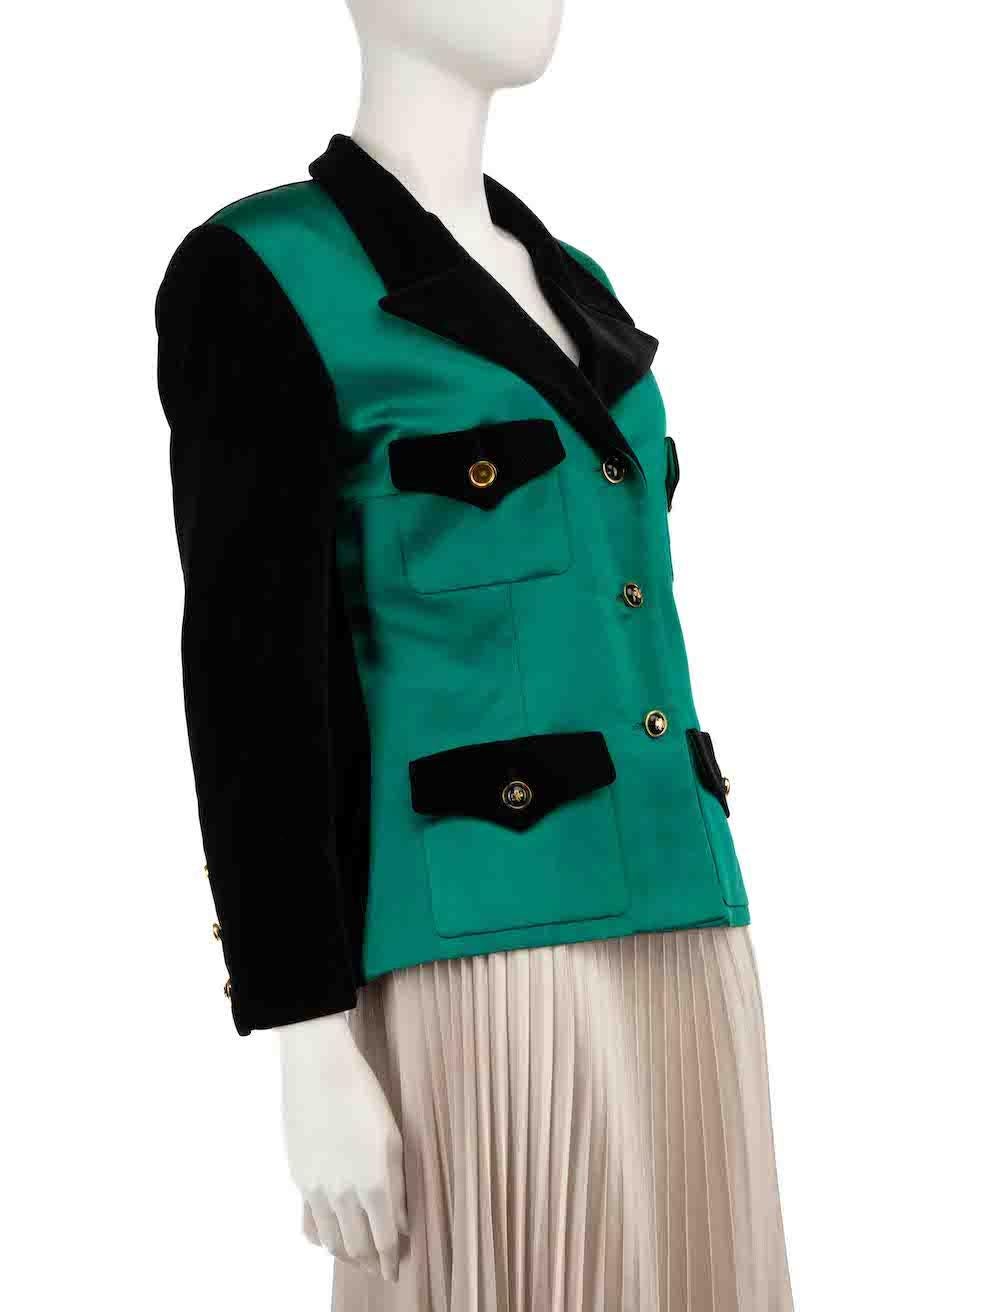 CONDITION is Very good. Minimal wear to jacket is evident. Minimal wear to top right pocket button with missing button charm and the top fastening button with missing four leaf clover on this used Chanel designer resale item.
 
 
 
 Details
 
 
